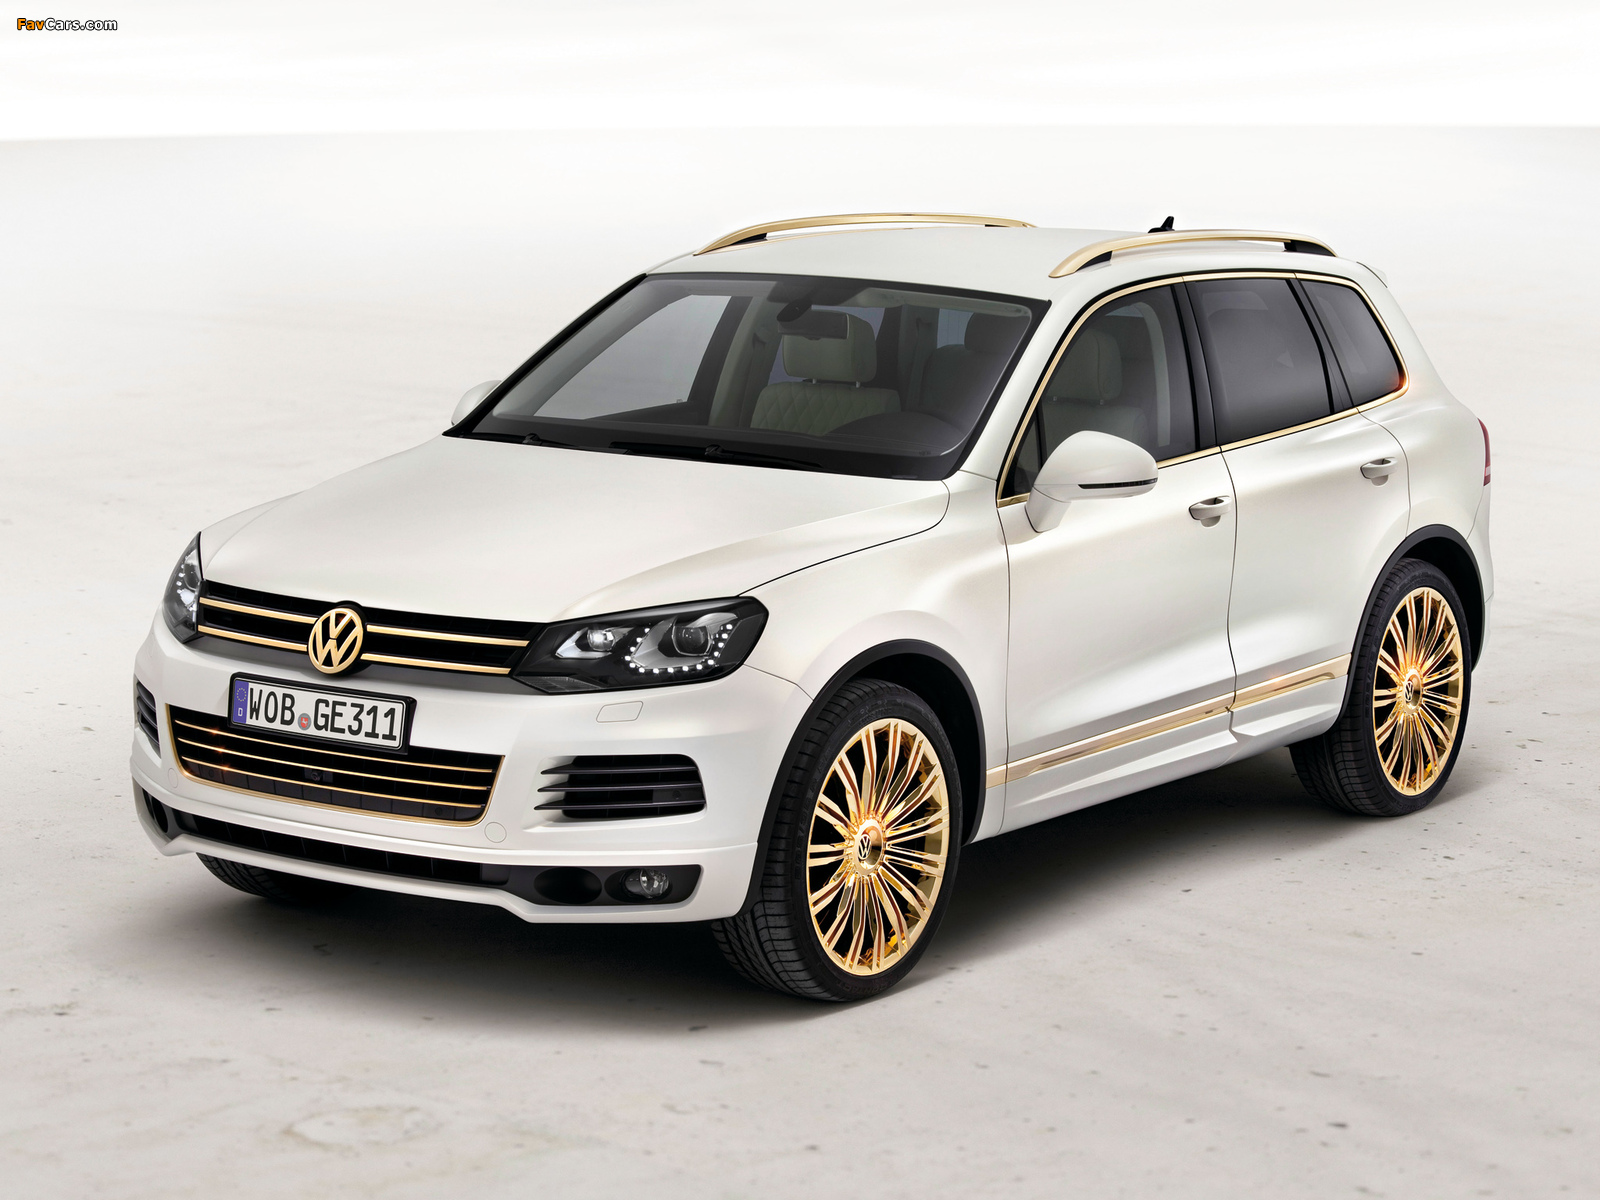 Volkswagen Touareg V8 TDI Gold Edition Concept 2011 wallpapers (1600 x 1200)